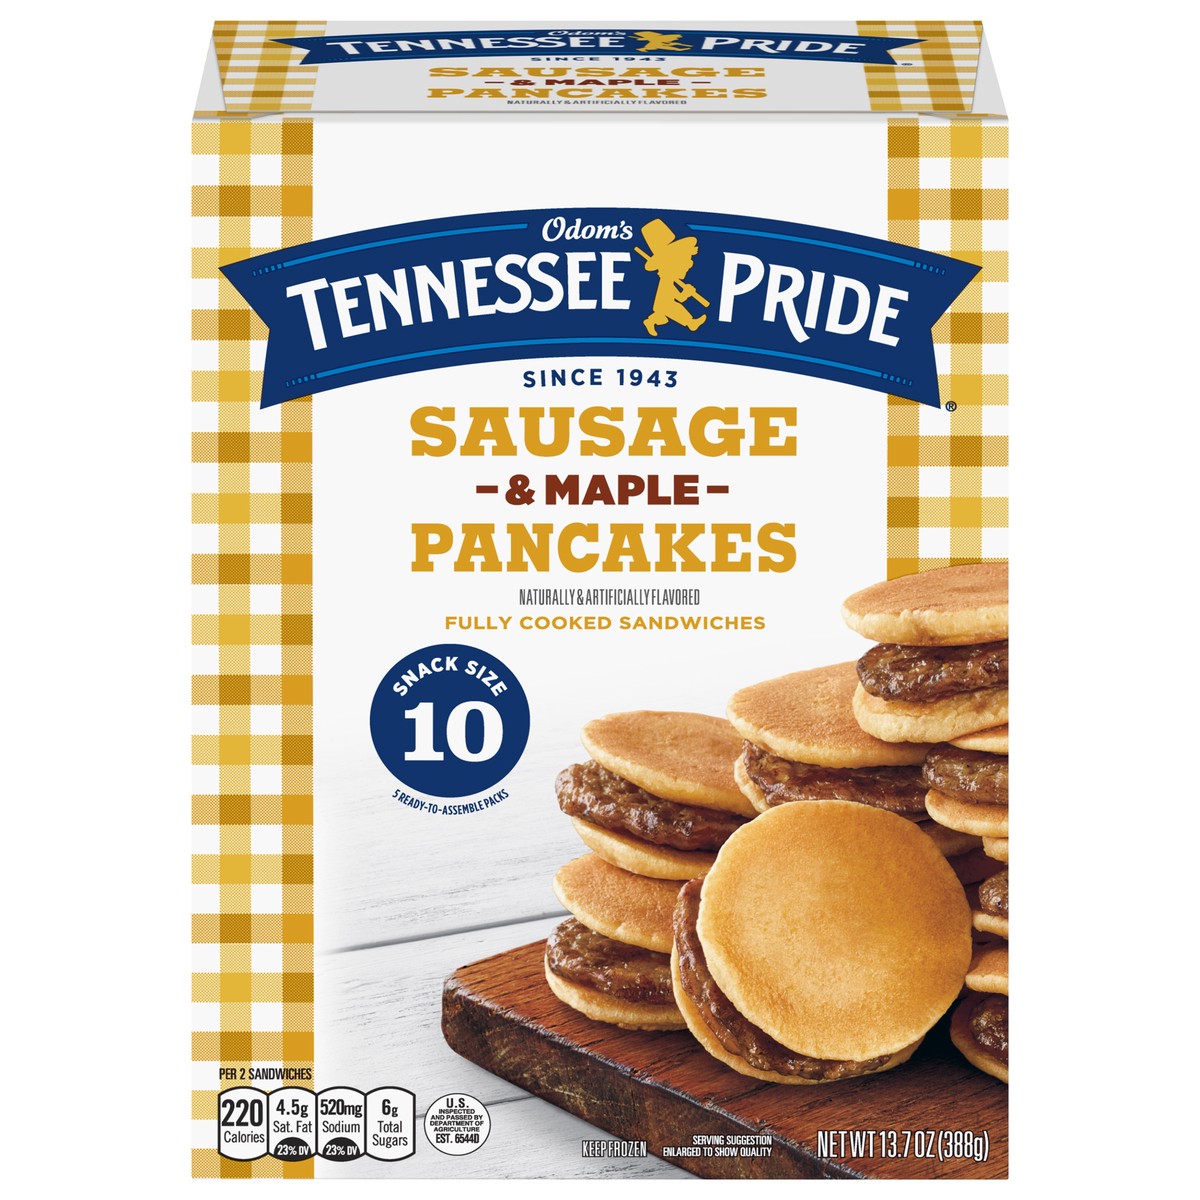 slide 11 of 11, Odom's Tennessee Pride Sausage & Maple Pancakes Snack Size 10 ea, 5 ct